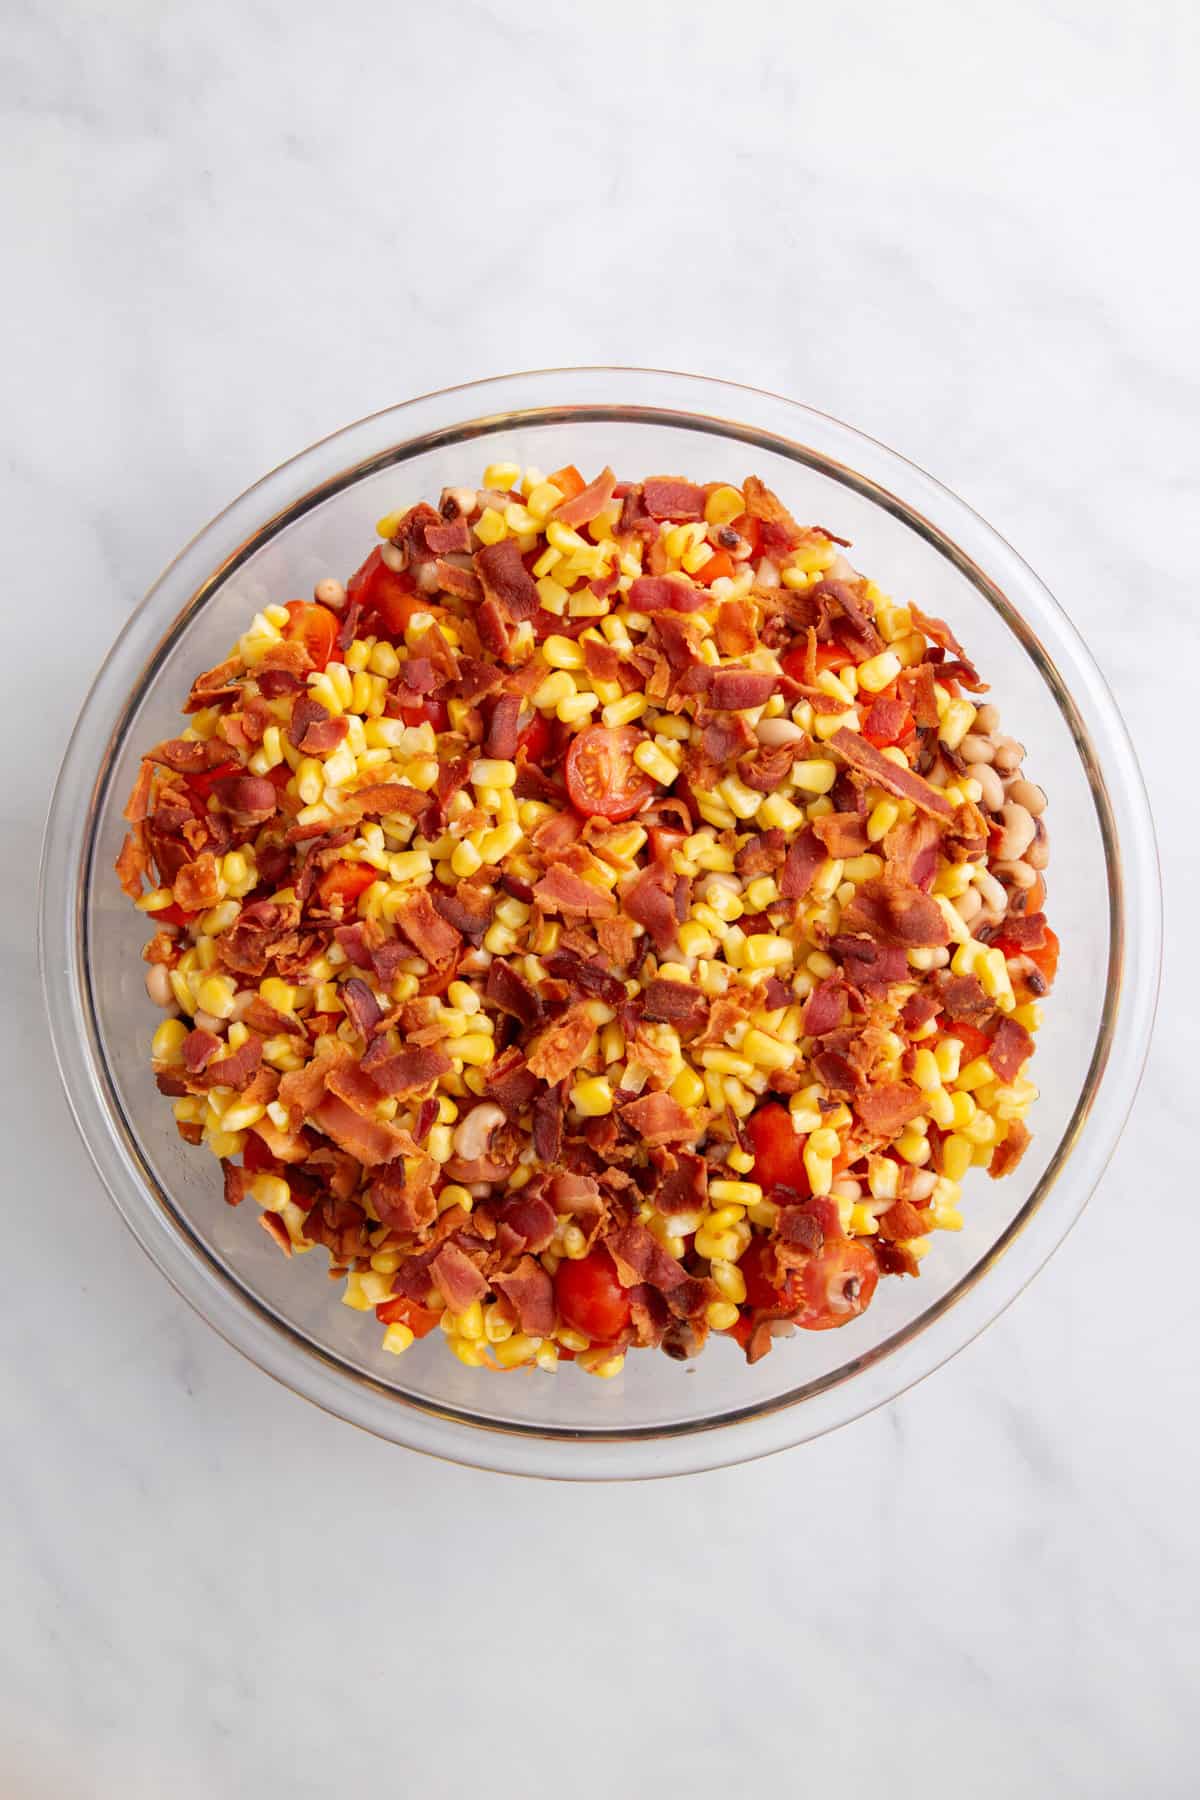 large glass bowl of black-eyed peas, halved cherry tomatoes, crumbled bacon and sweet corn kernels.